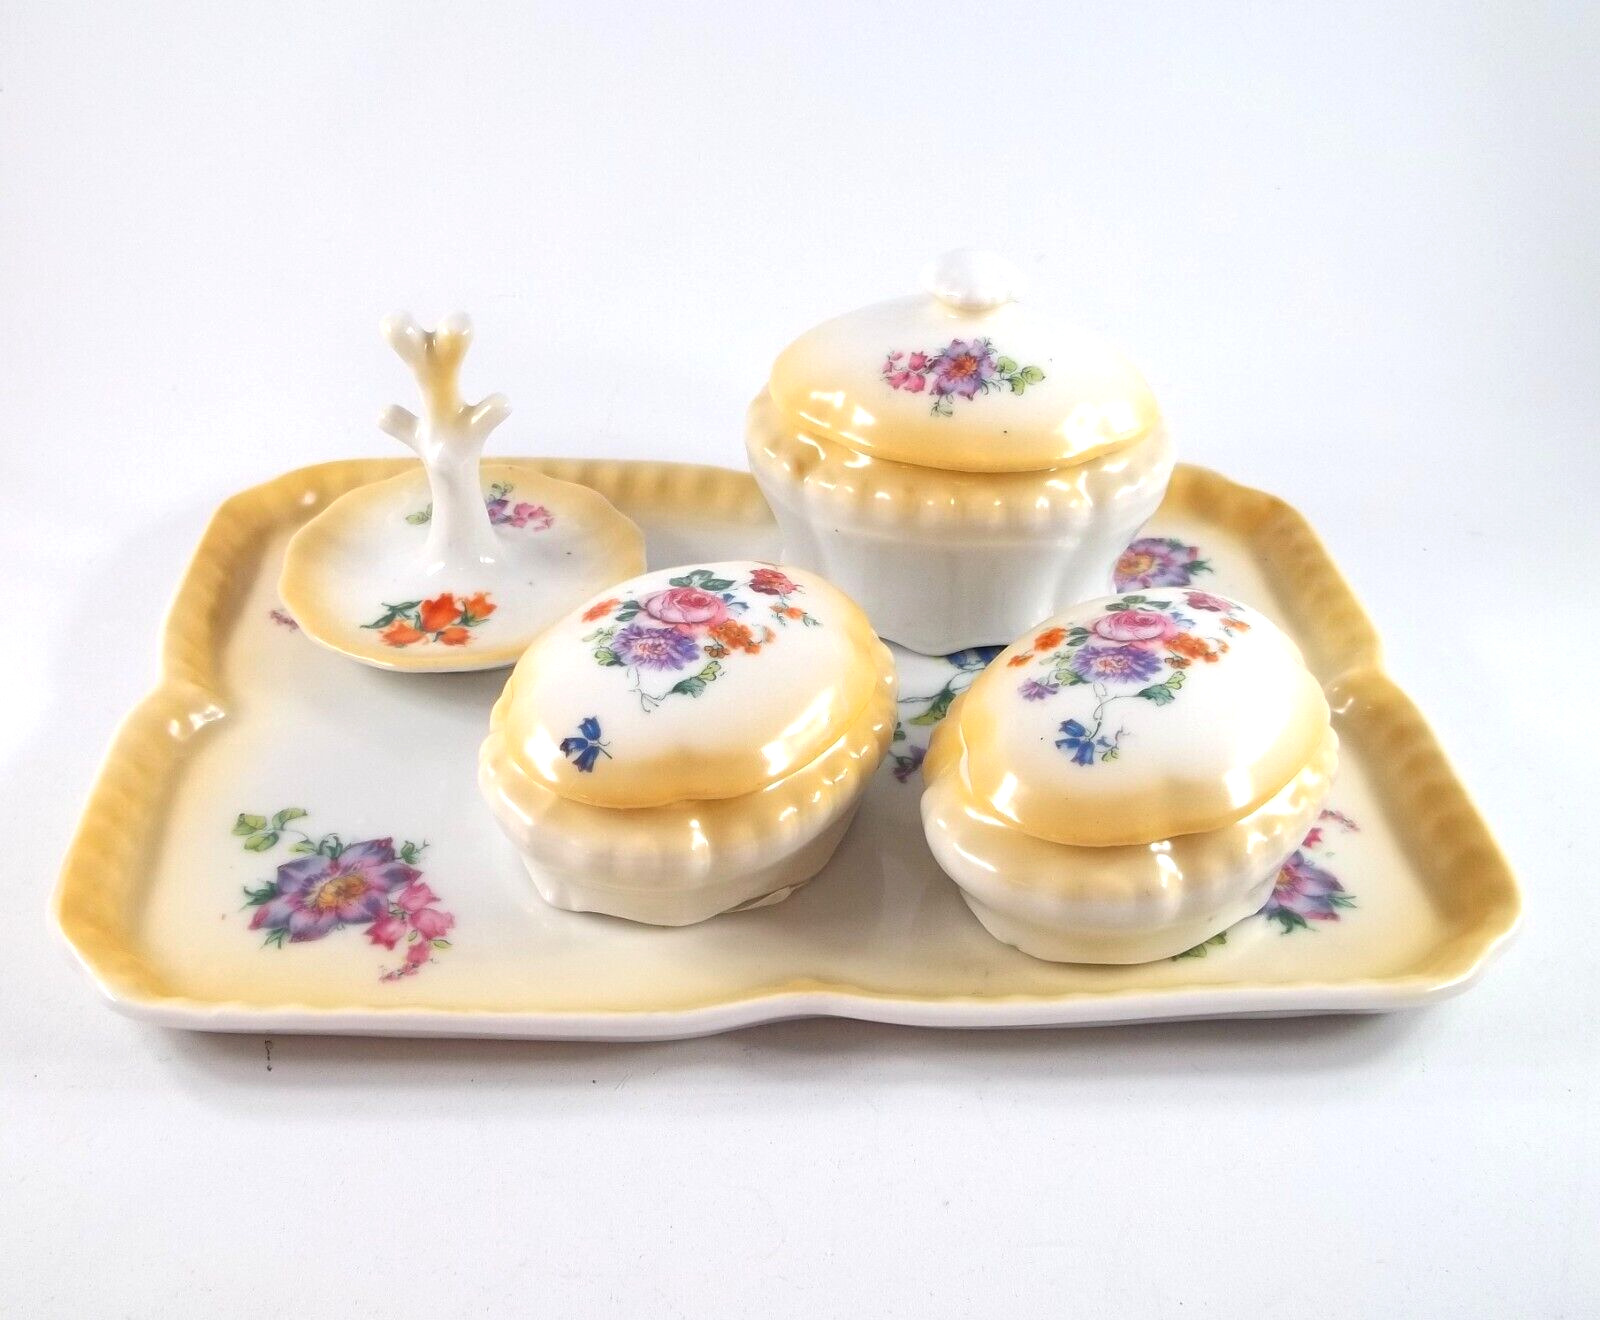 8 Piece Ceramic Vanity Set With Floral Decoration -  Tray,  Boxes, Ring Tree